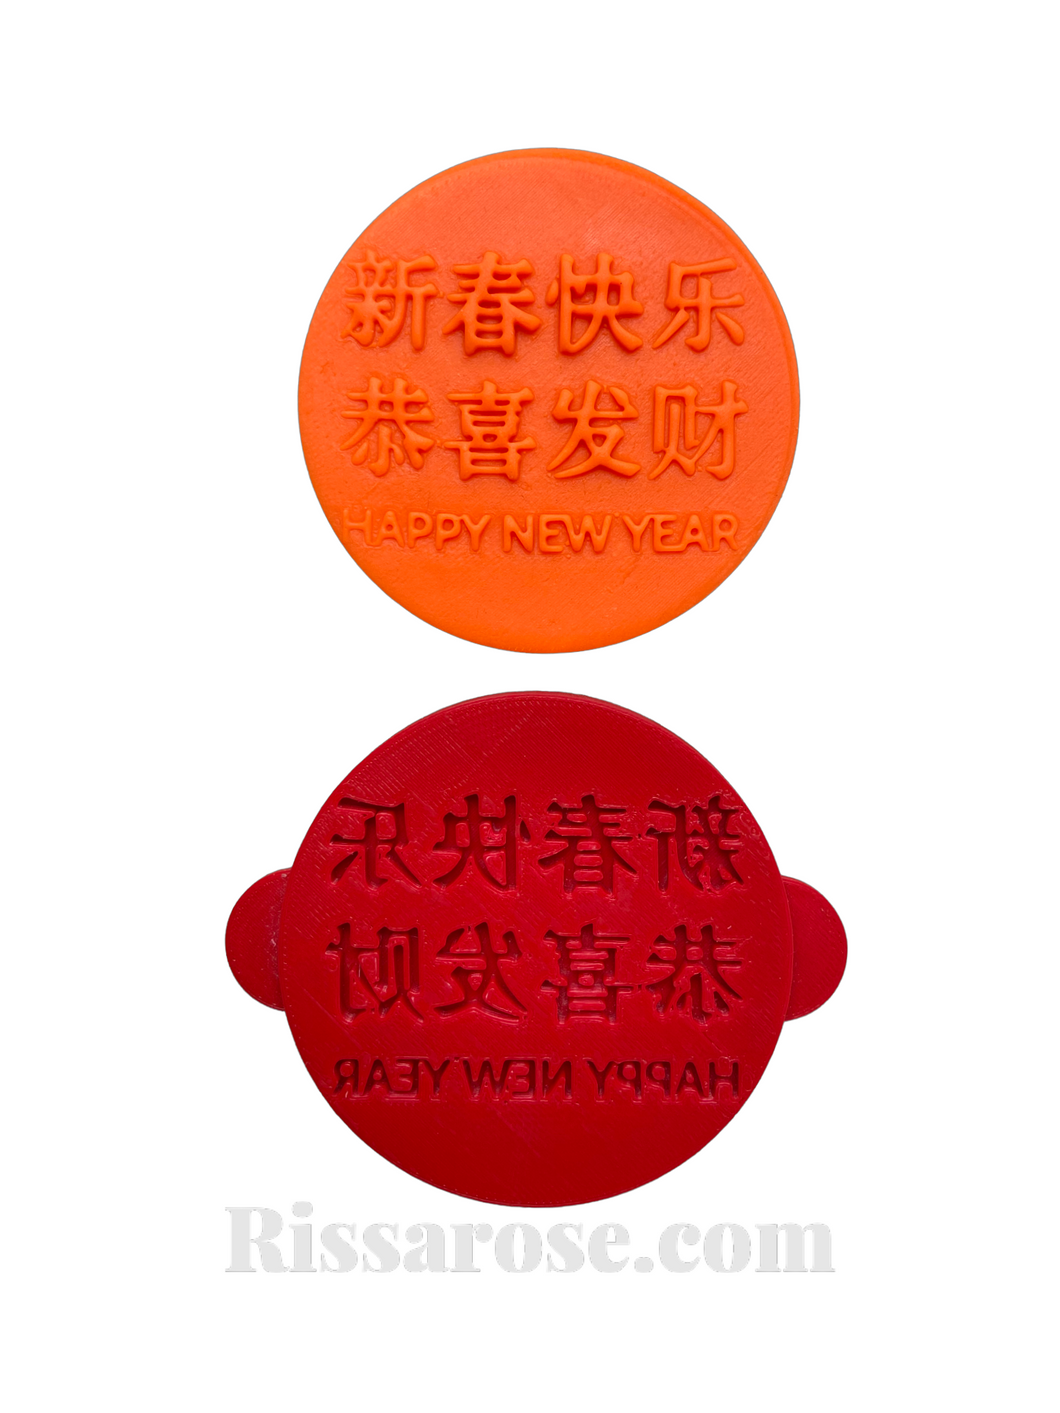 chinese new year cookie debosser tiger year fondant clay 2022 fortune luna year happy new year